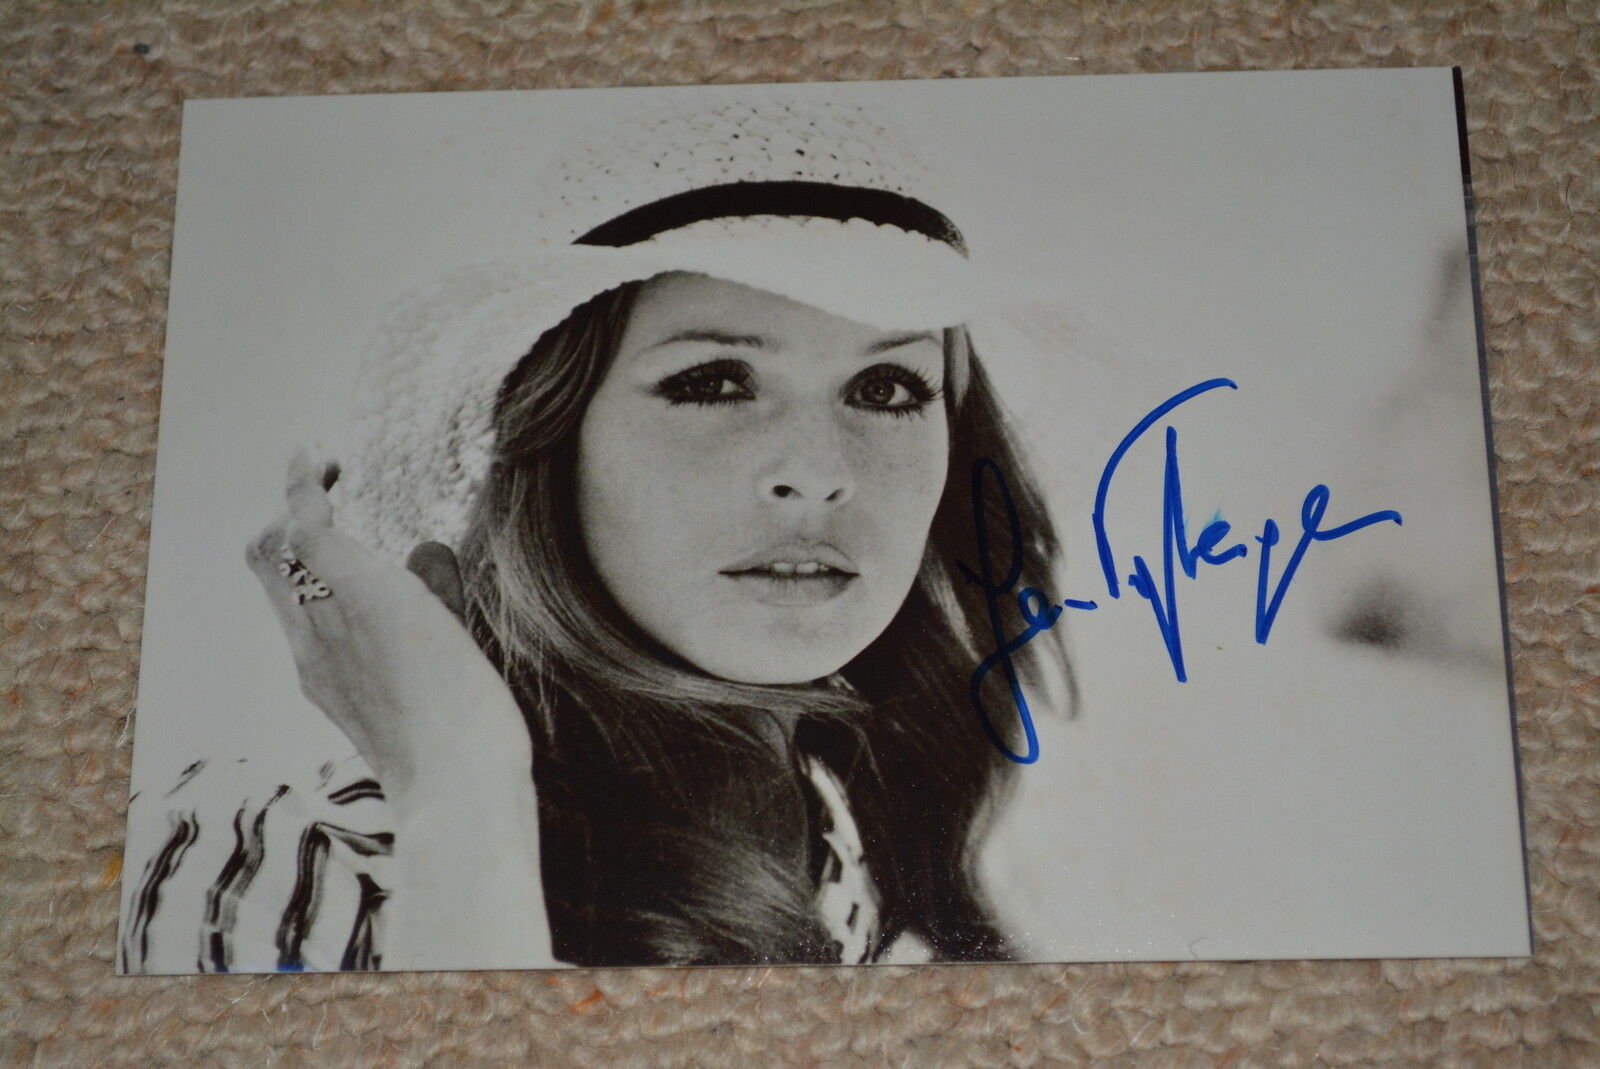 SENTA BERGER signed autograph In Person 5x7 (13x18 cm) CAST A GIANT SHADOW